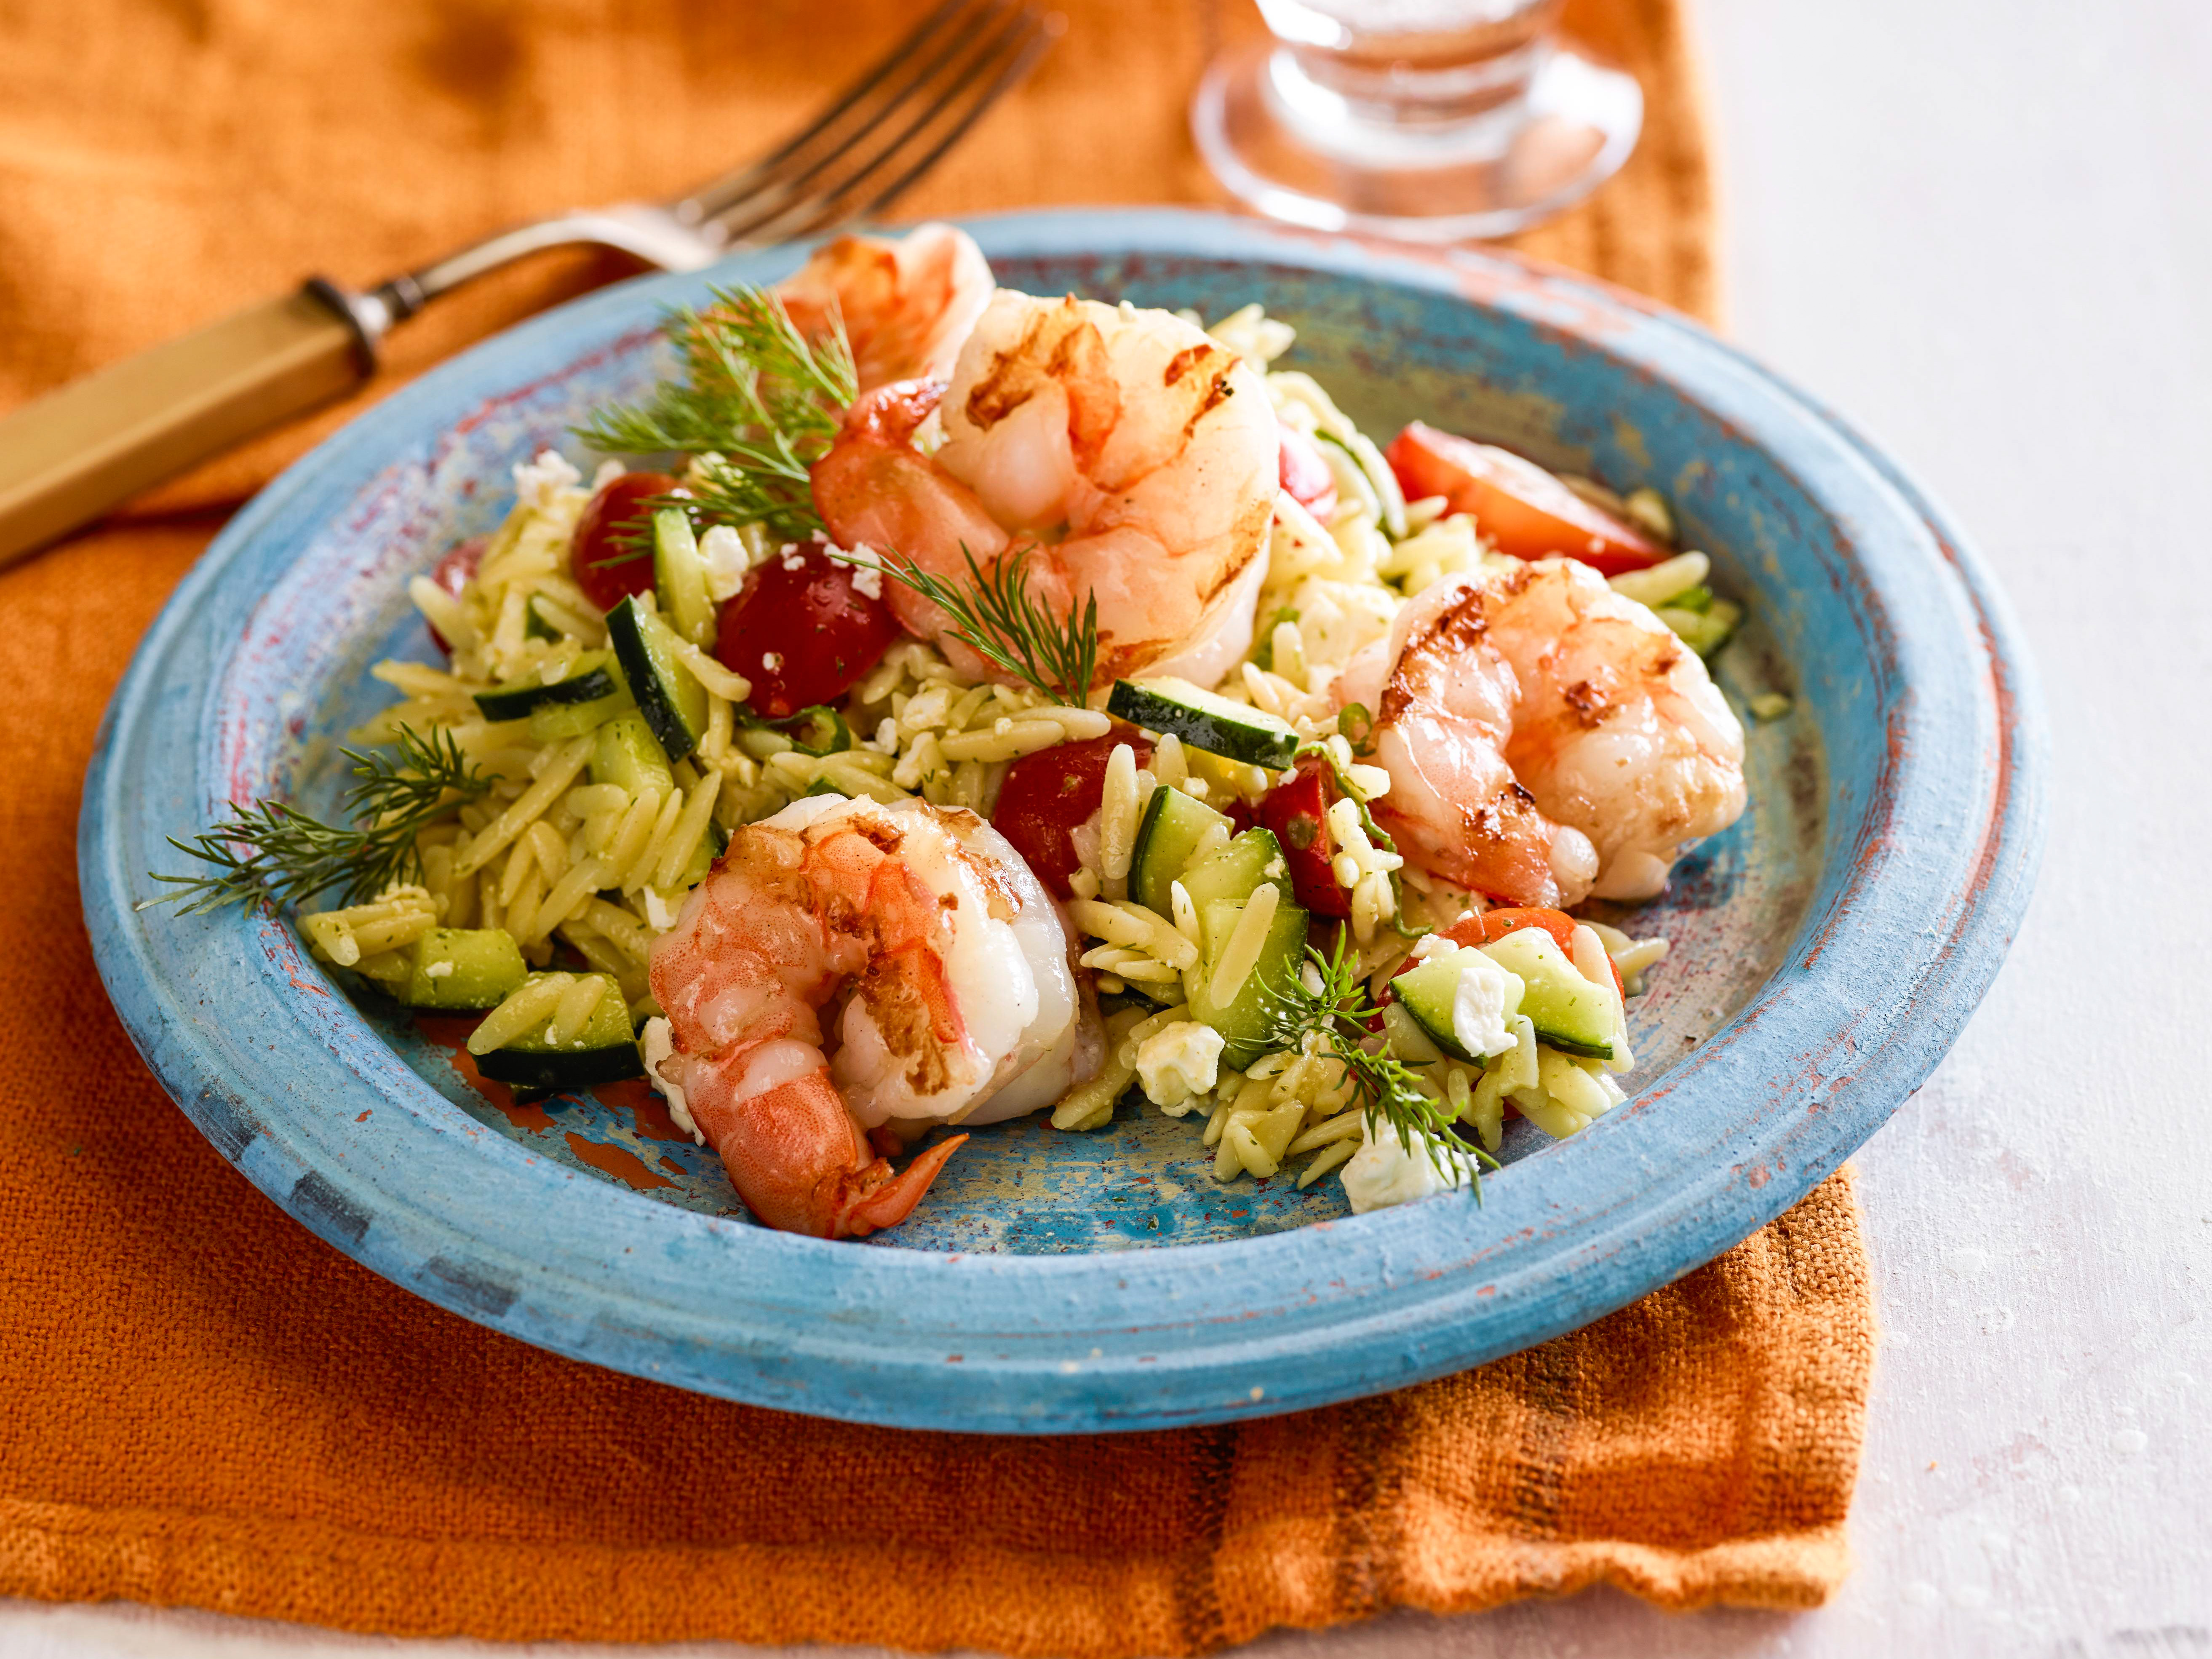 Bobby Flay | Greek Orzo & Grilled Shrimp Salad with Mustard-Dill